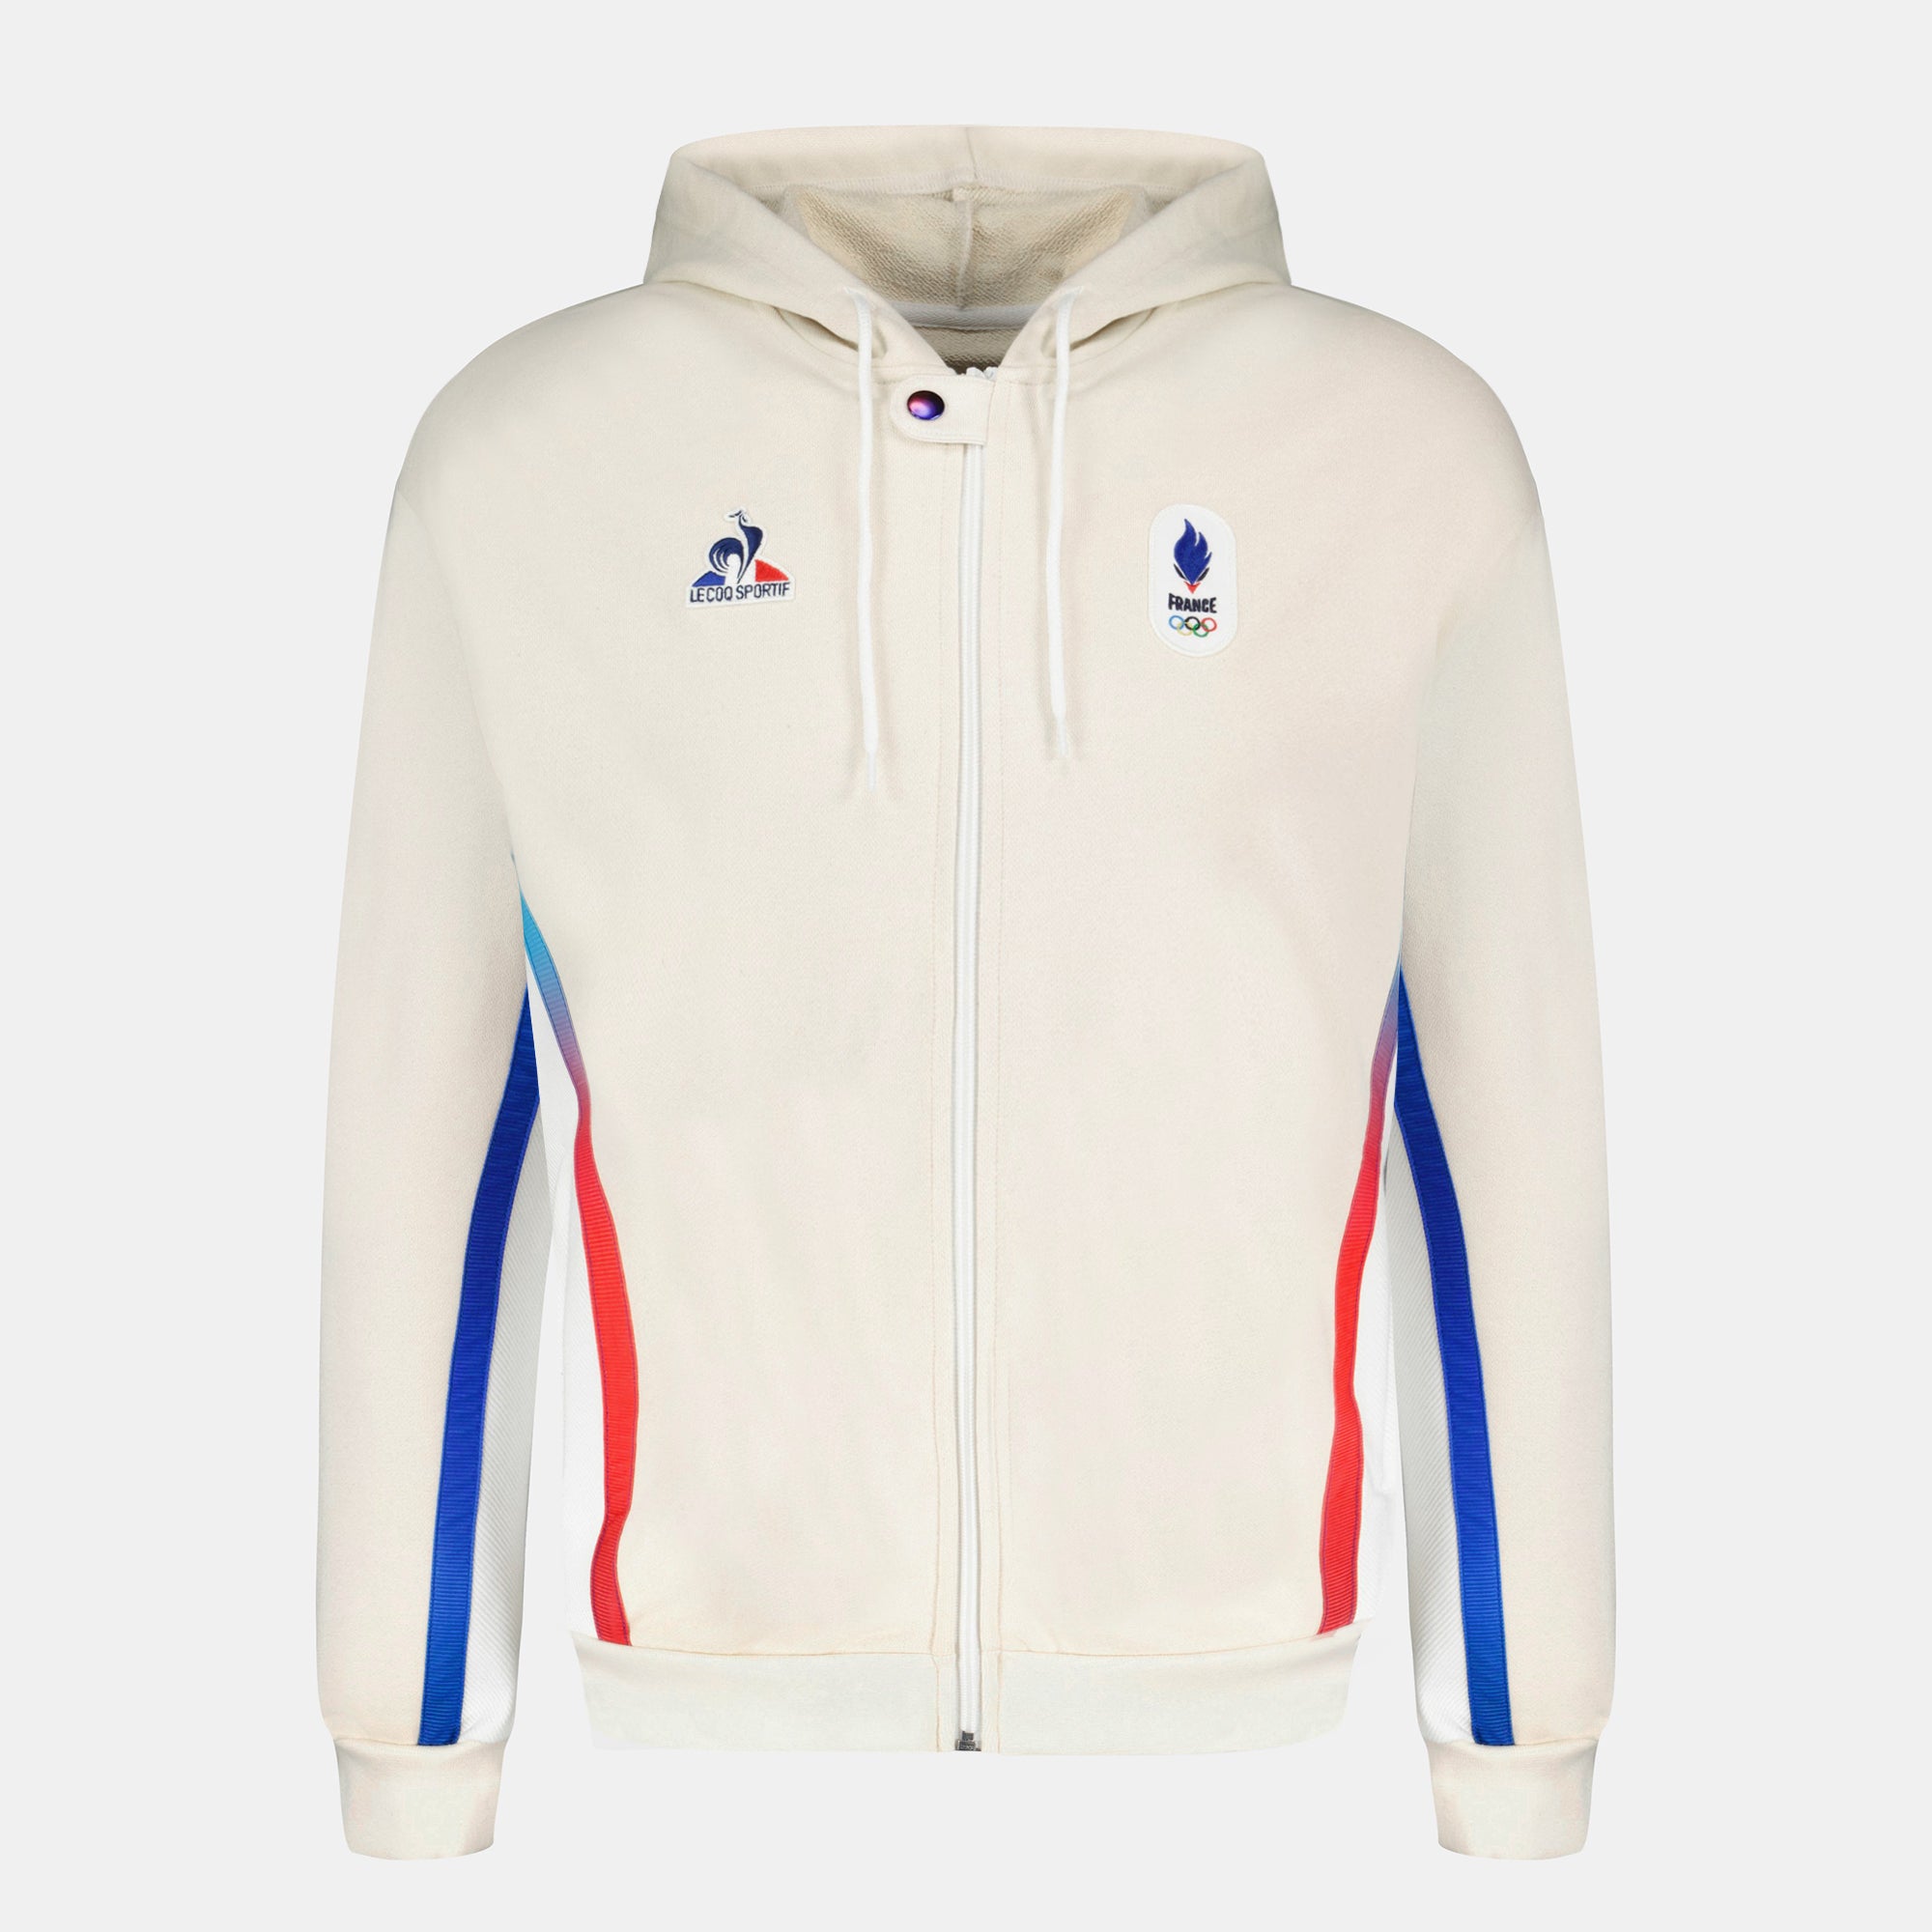 Le Coq Sportif: French sports clothing and shoes brand